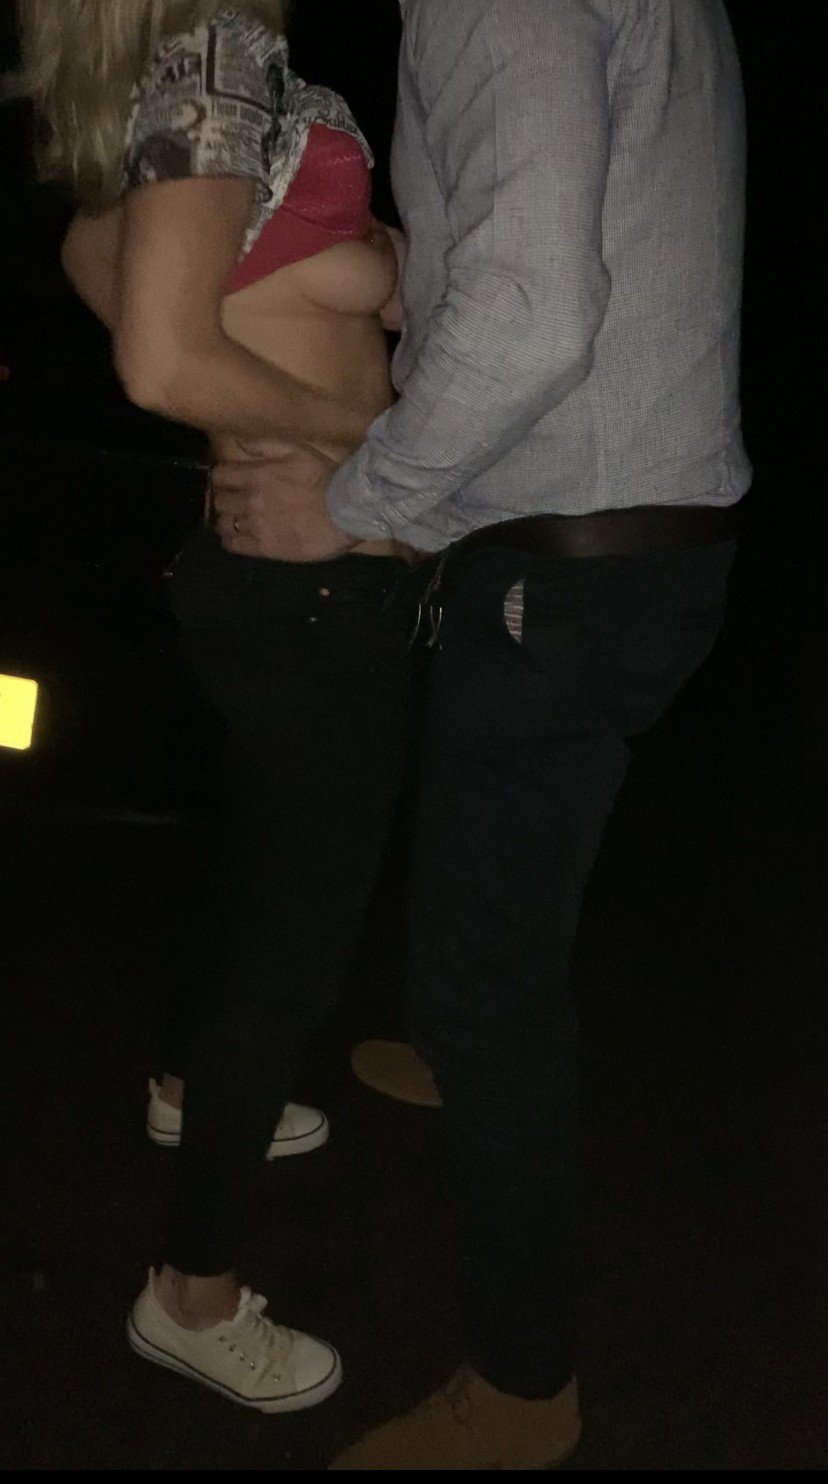 Photo by Kimthemilf with the username @Kimthemilf, who is a verified user,  May 7, 2022 at 12:43 PM. The post is about the topic Dogging and the text says 'Just wanted to say a big thankyou to @Craig1886 on here who very kindly took me for a drink last night and then parked up on our way home, pulled my panties down and put his dick inside my pussy!!

Thanks Craig1886 hope to see you again soon'